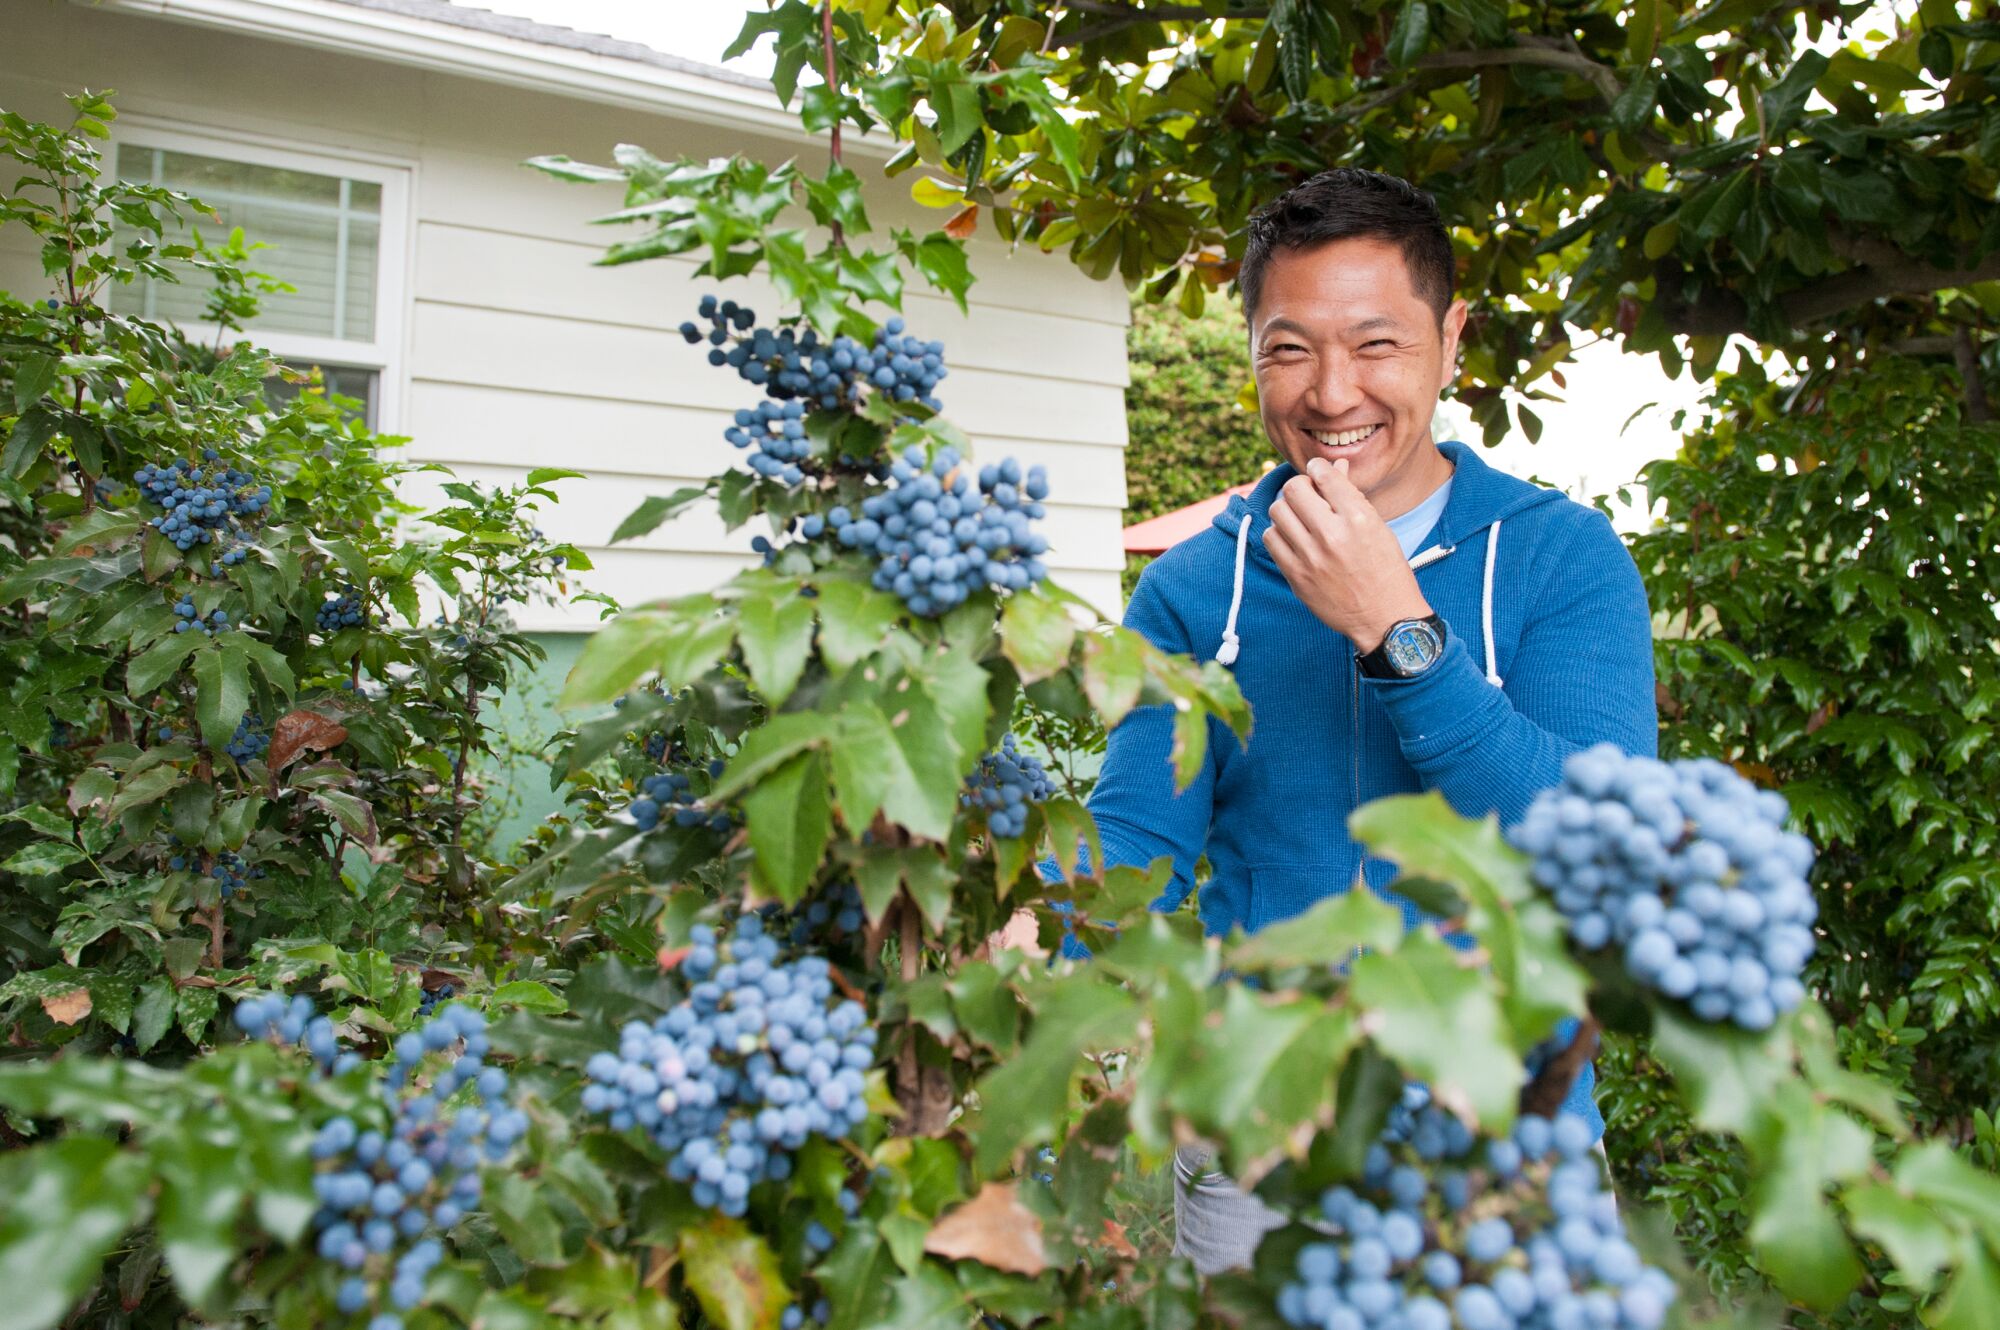 Isara Ongwiseth stands smiling behind a shrub covered with clusters of blue berries.